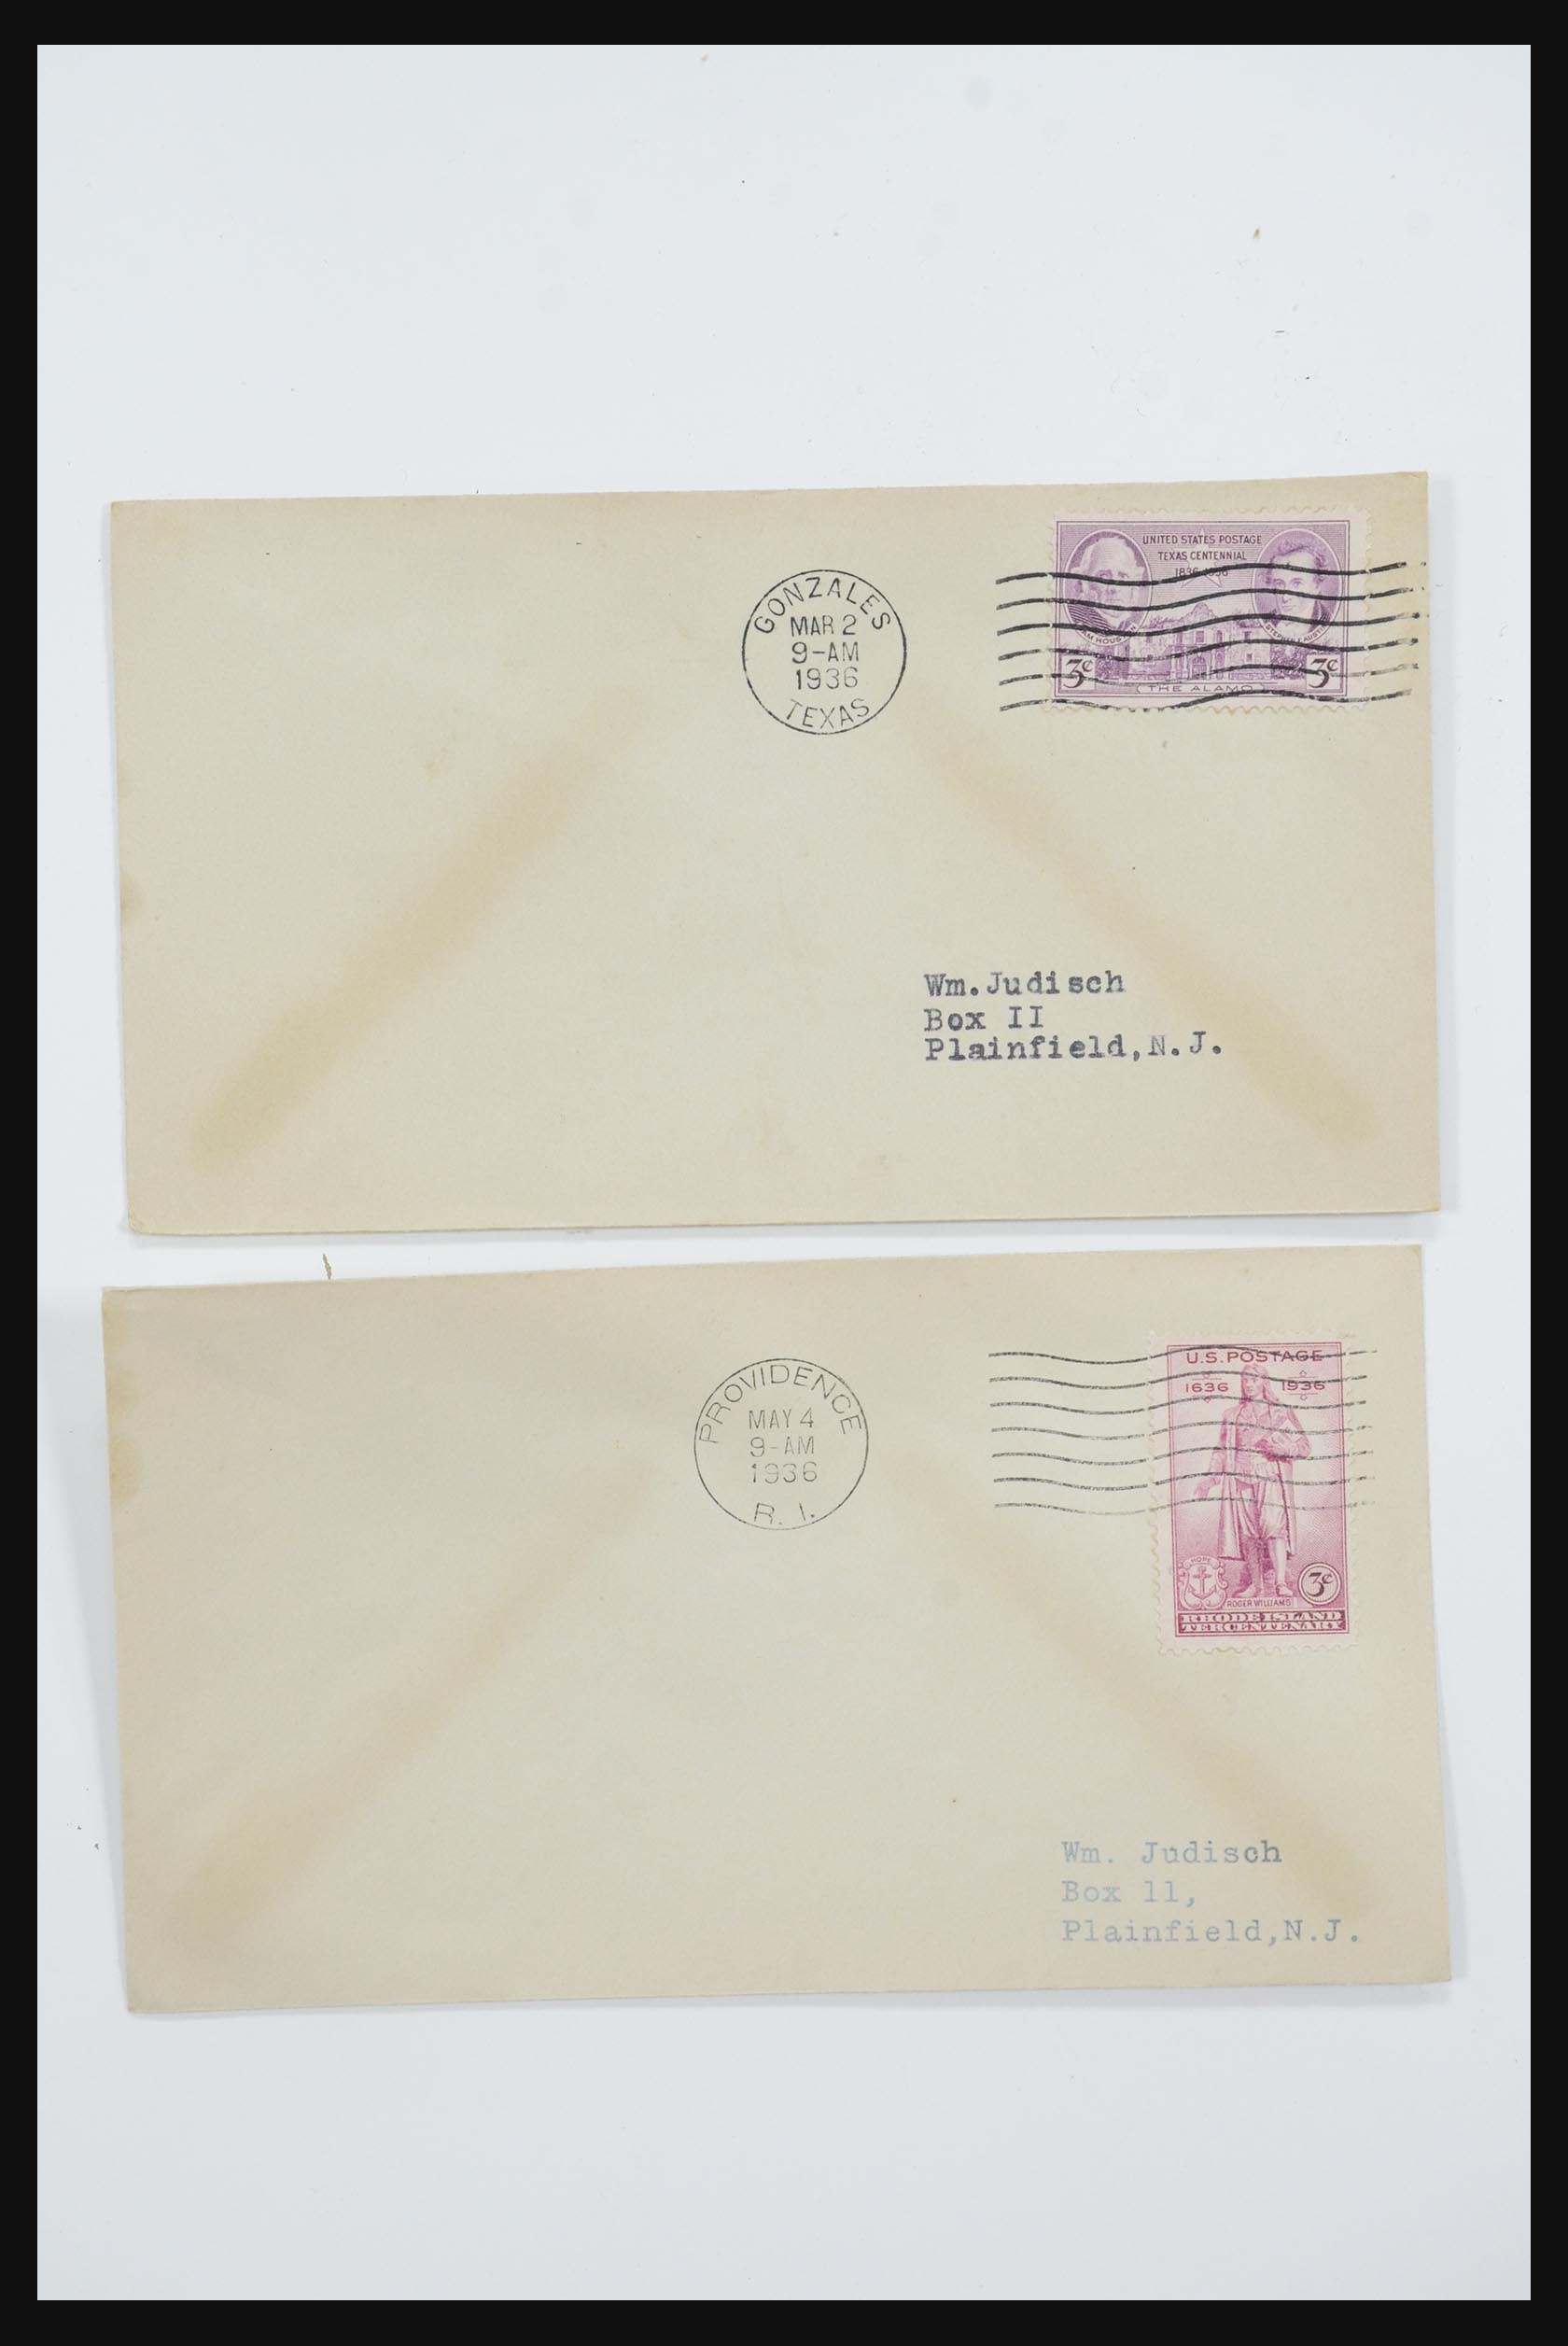 31728 550 - 31728 USA covers and FDC's 1880-1980.